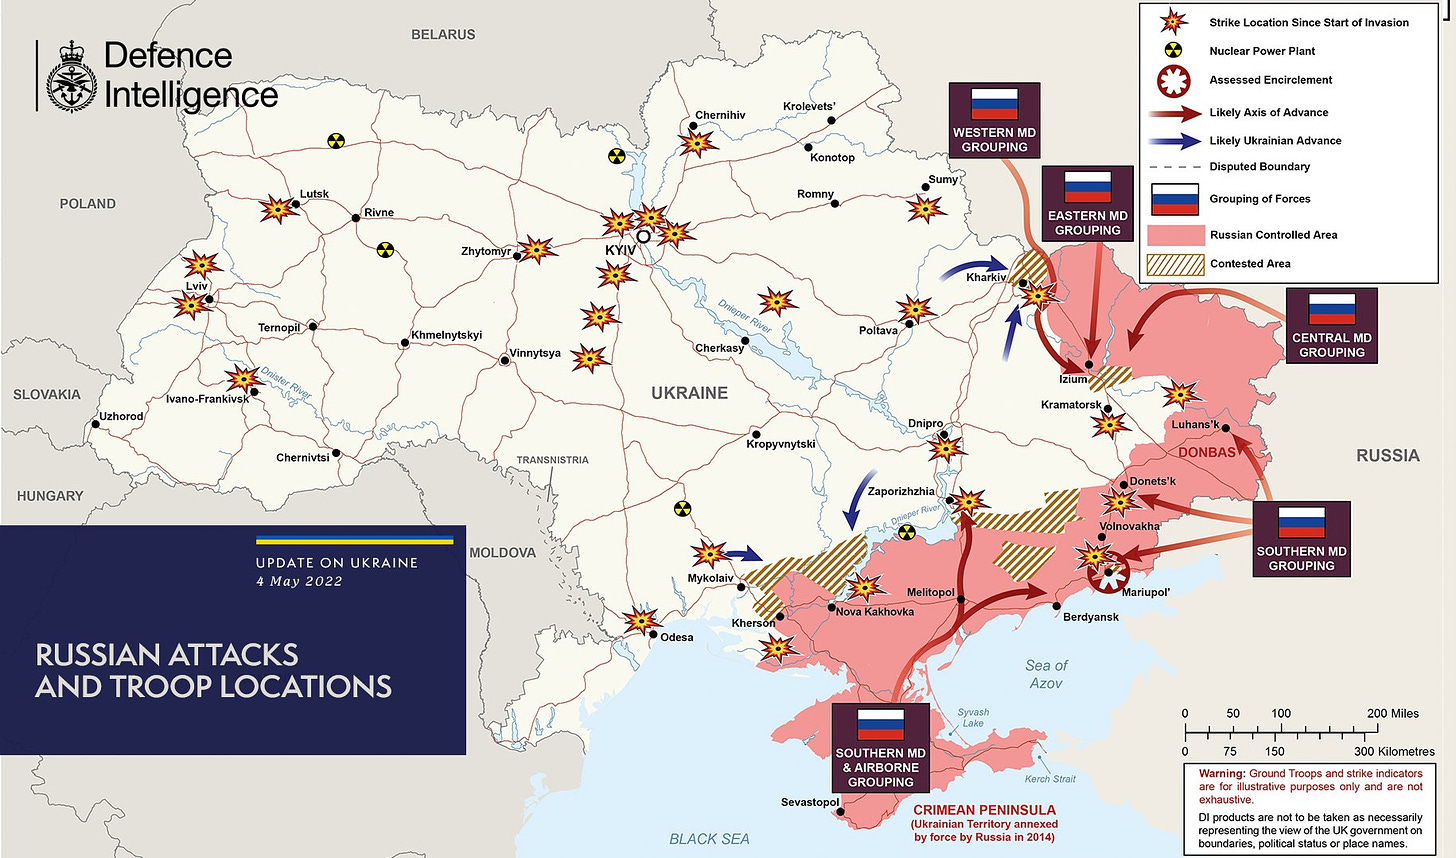 Russian attacks and troop locations map 4 May 2022